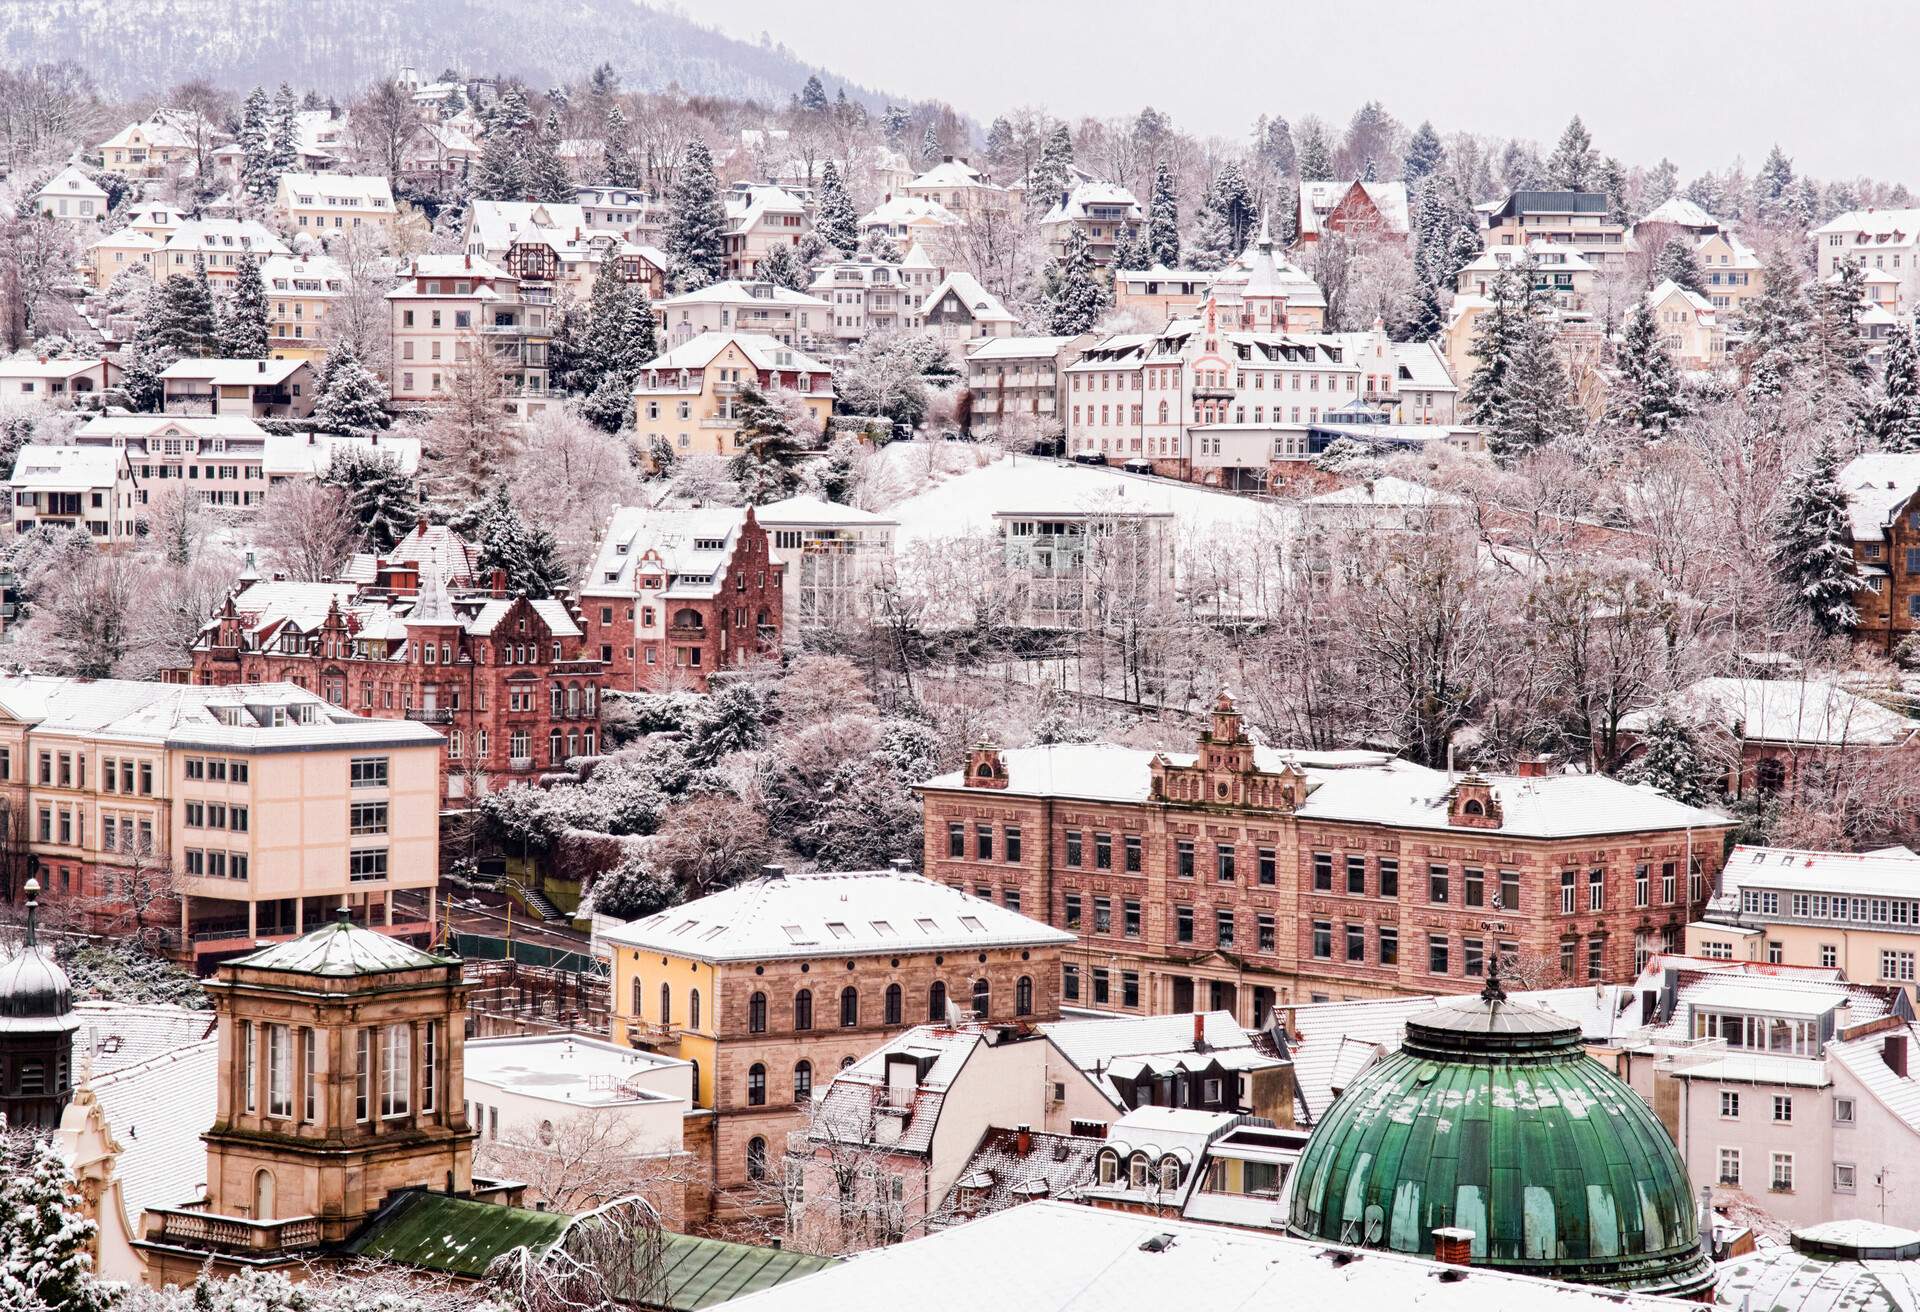 Top view of a cityscape in the snow with classic buildings surrounded by tall frosted trees.